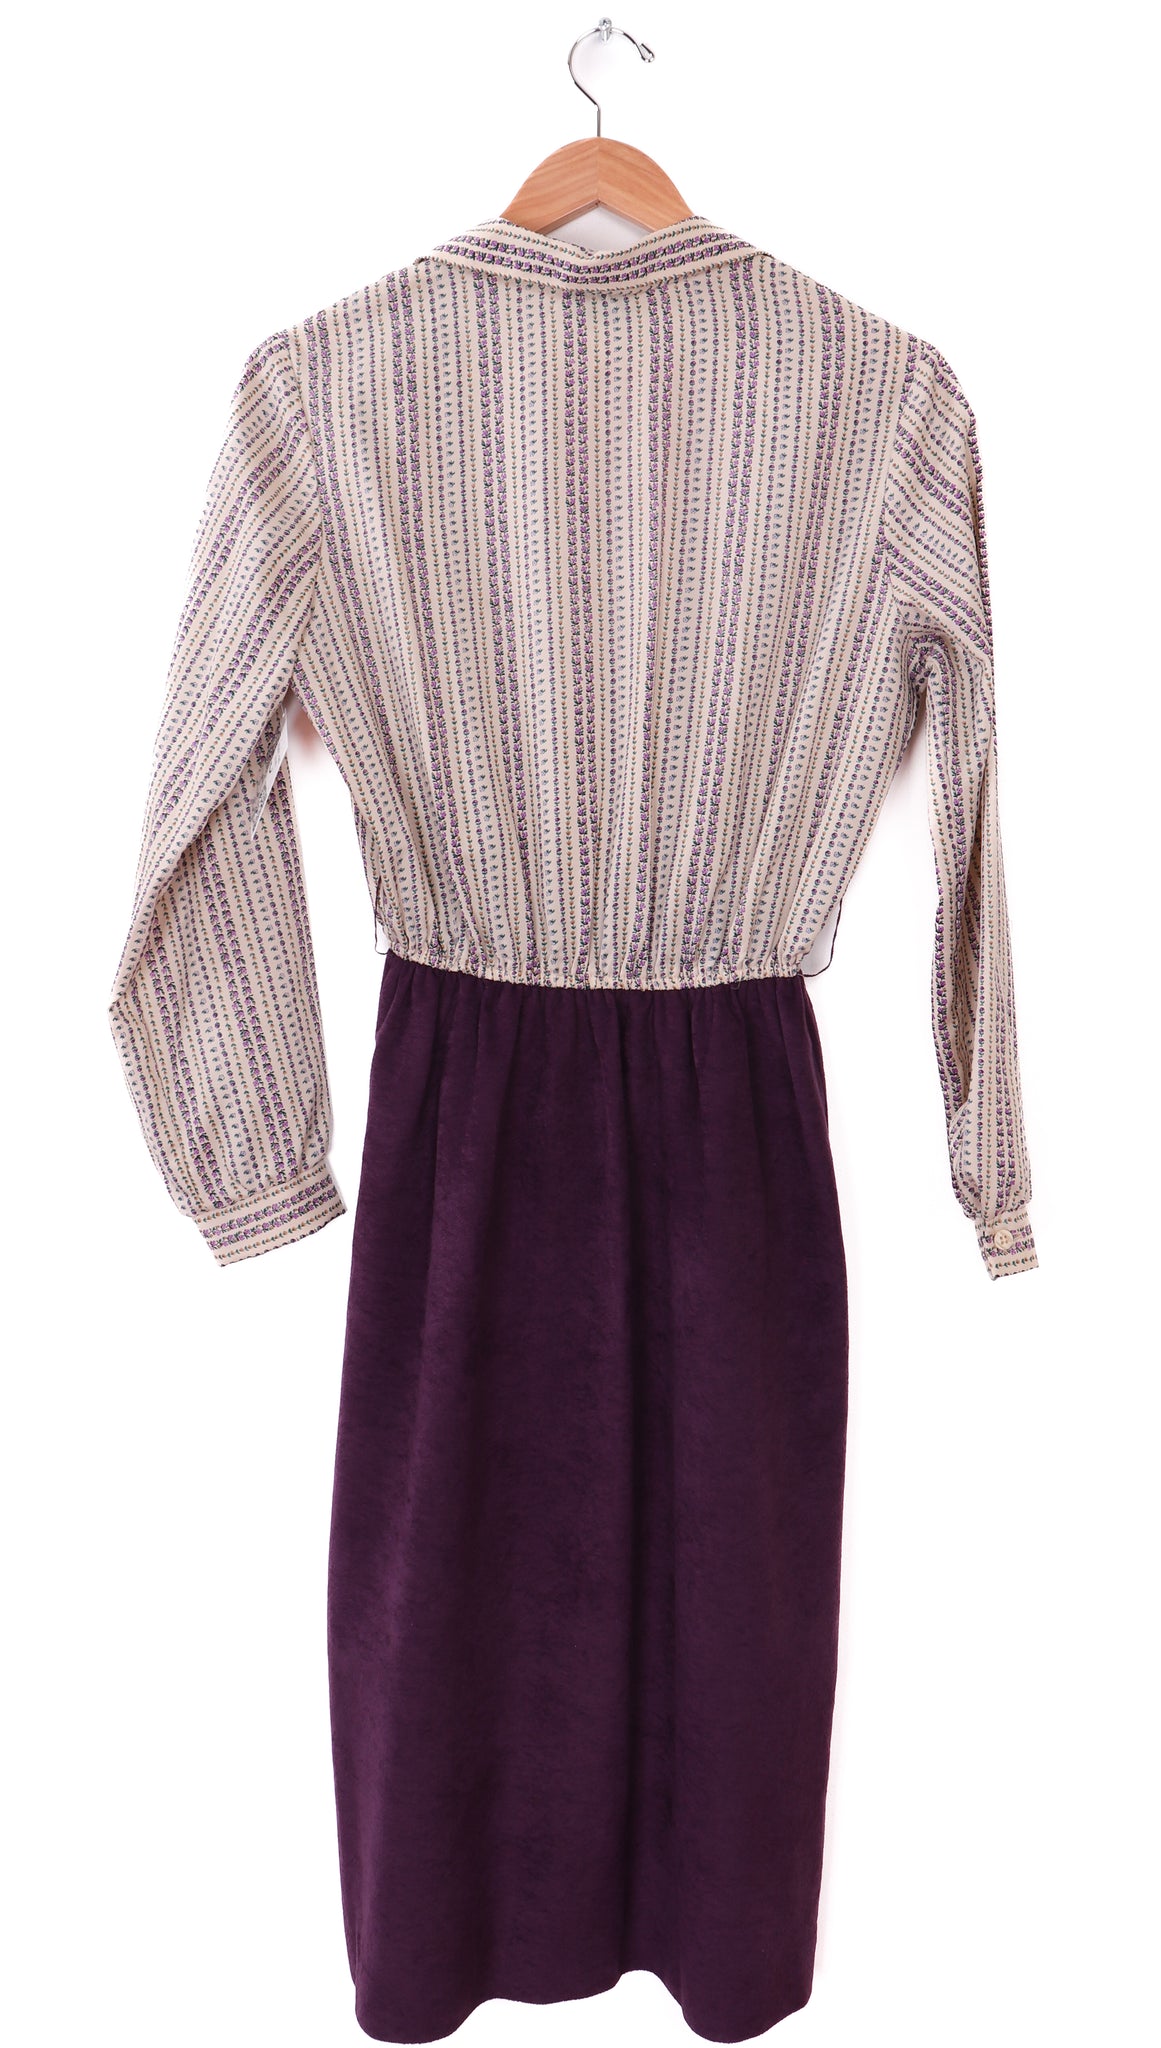 Union Made 70s Beeqe Lavender Dress